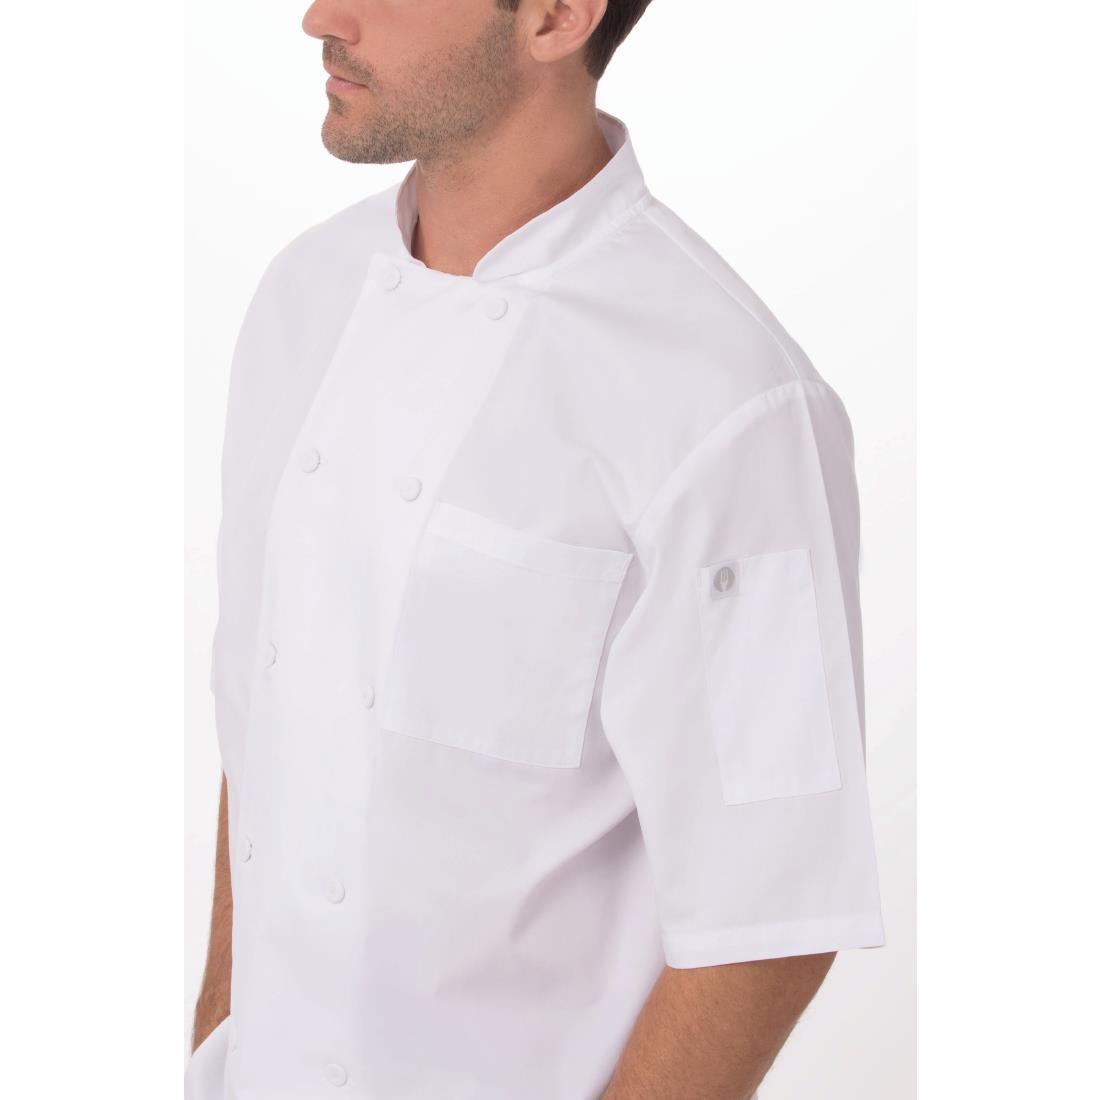 Chefs Works Montreal Cool Vent Unisex Short Sleeve Chefs Jacket White 2XL - A914-XXL  - 6